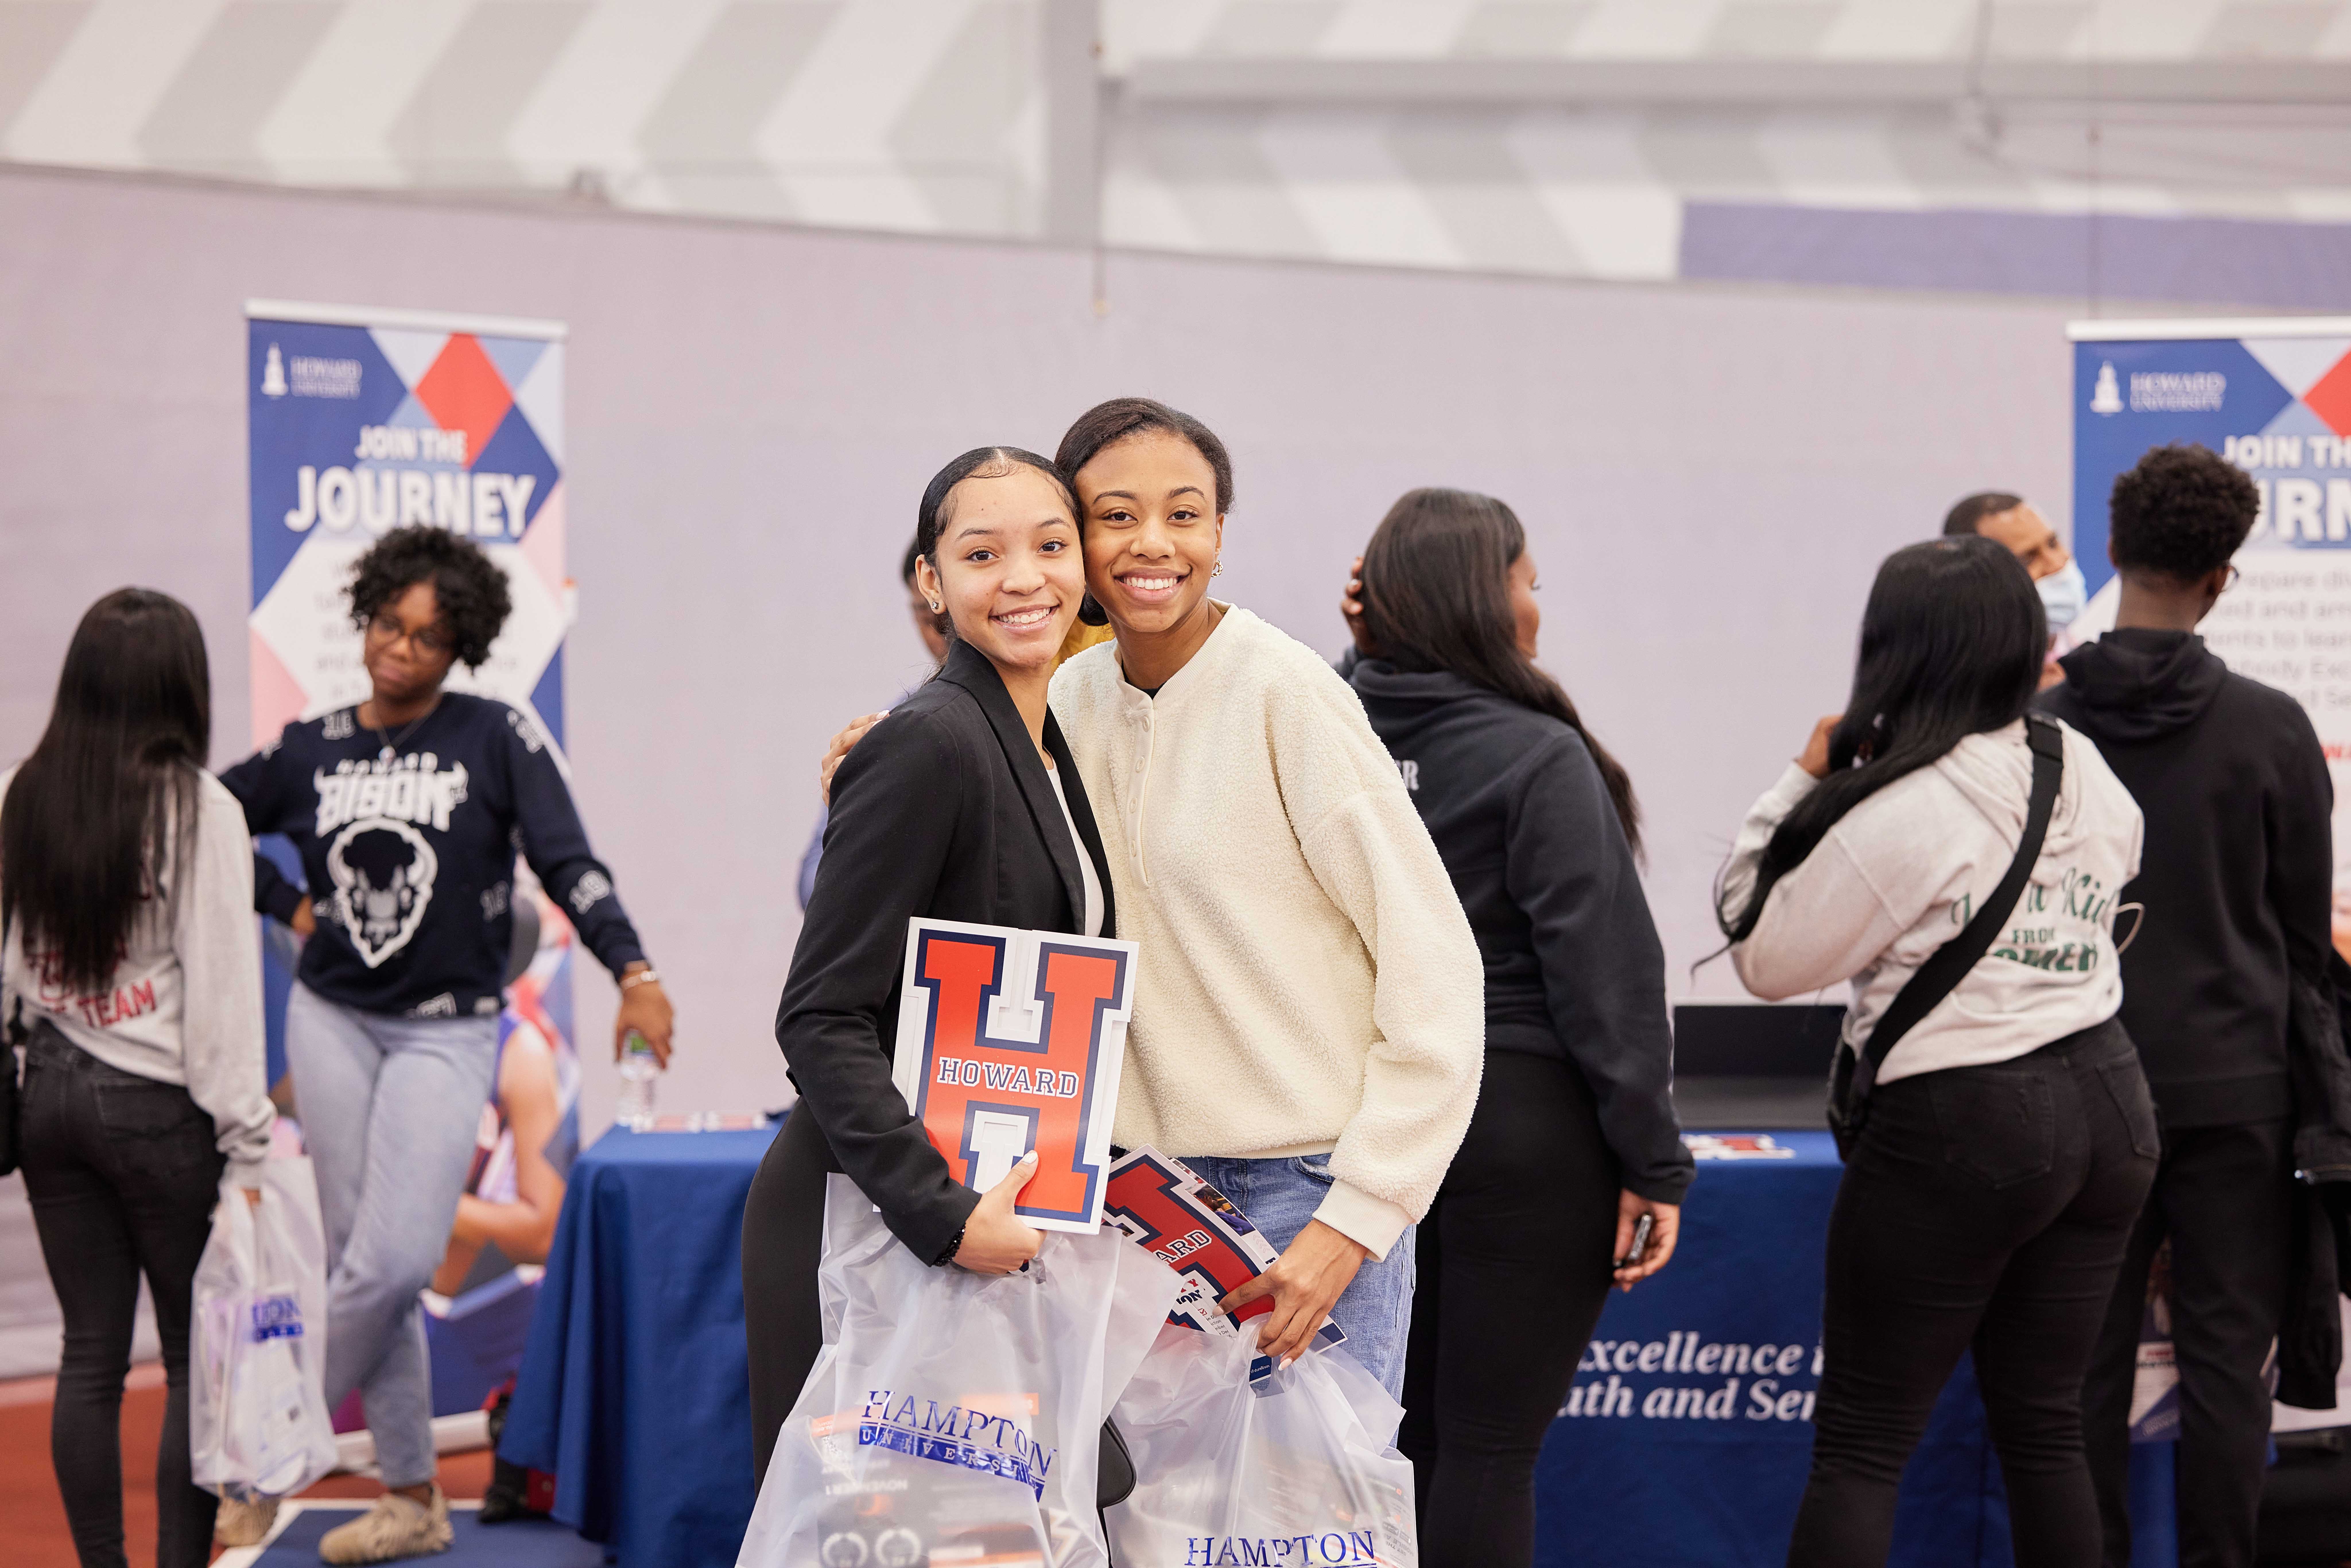 In this photo, you can see Madison and Laniya, two seniors at Muchin College Prep, side-hugging and smiling as they pose in front of the Howard University booth at Noble Schools' HBCU College Fair. Madison is holding a big decal for Howard University right in front of her waist prominently. Laniya also is holding one but it is partially hidden. They both are holding goodie bags that have Hampton University's logo on it. Behind them, you can see Howard University college representatives talking with other Noble students.